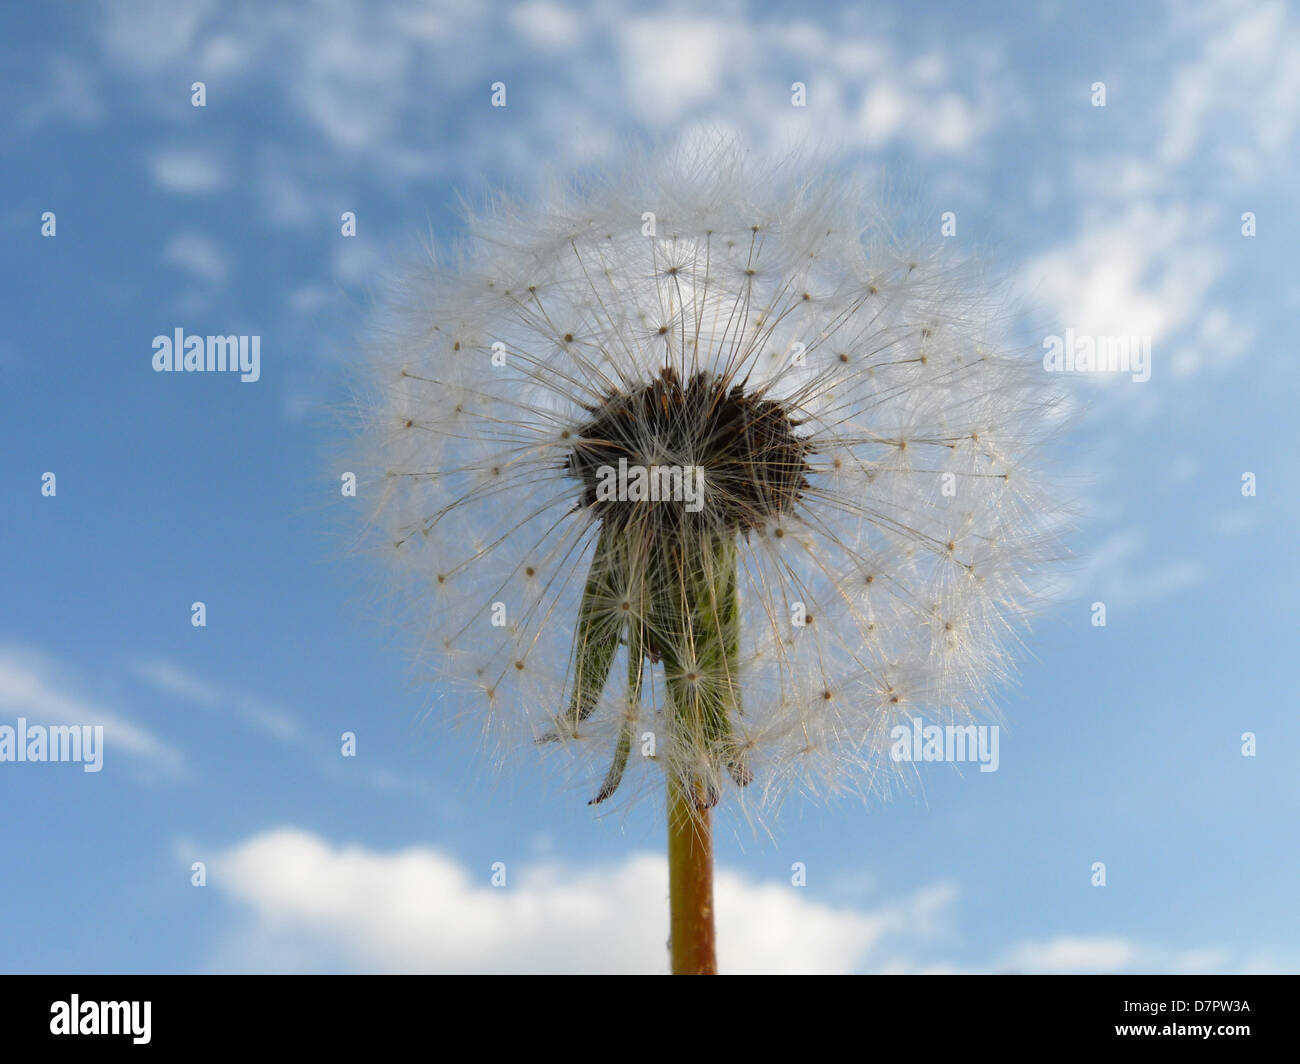 Dandelion sky parachutes flower seeds summer clouds wind nature weed down allergy May blowing light weightless beauty bowl stem Stock Photo